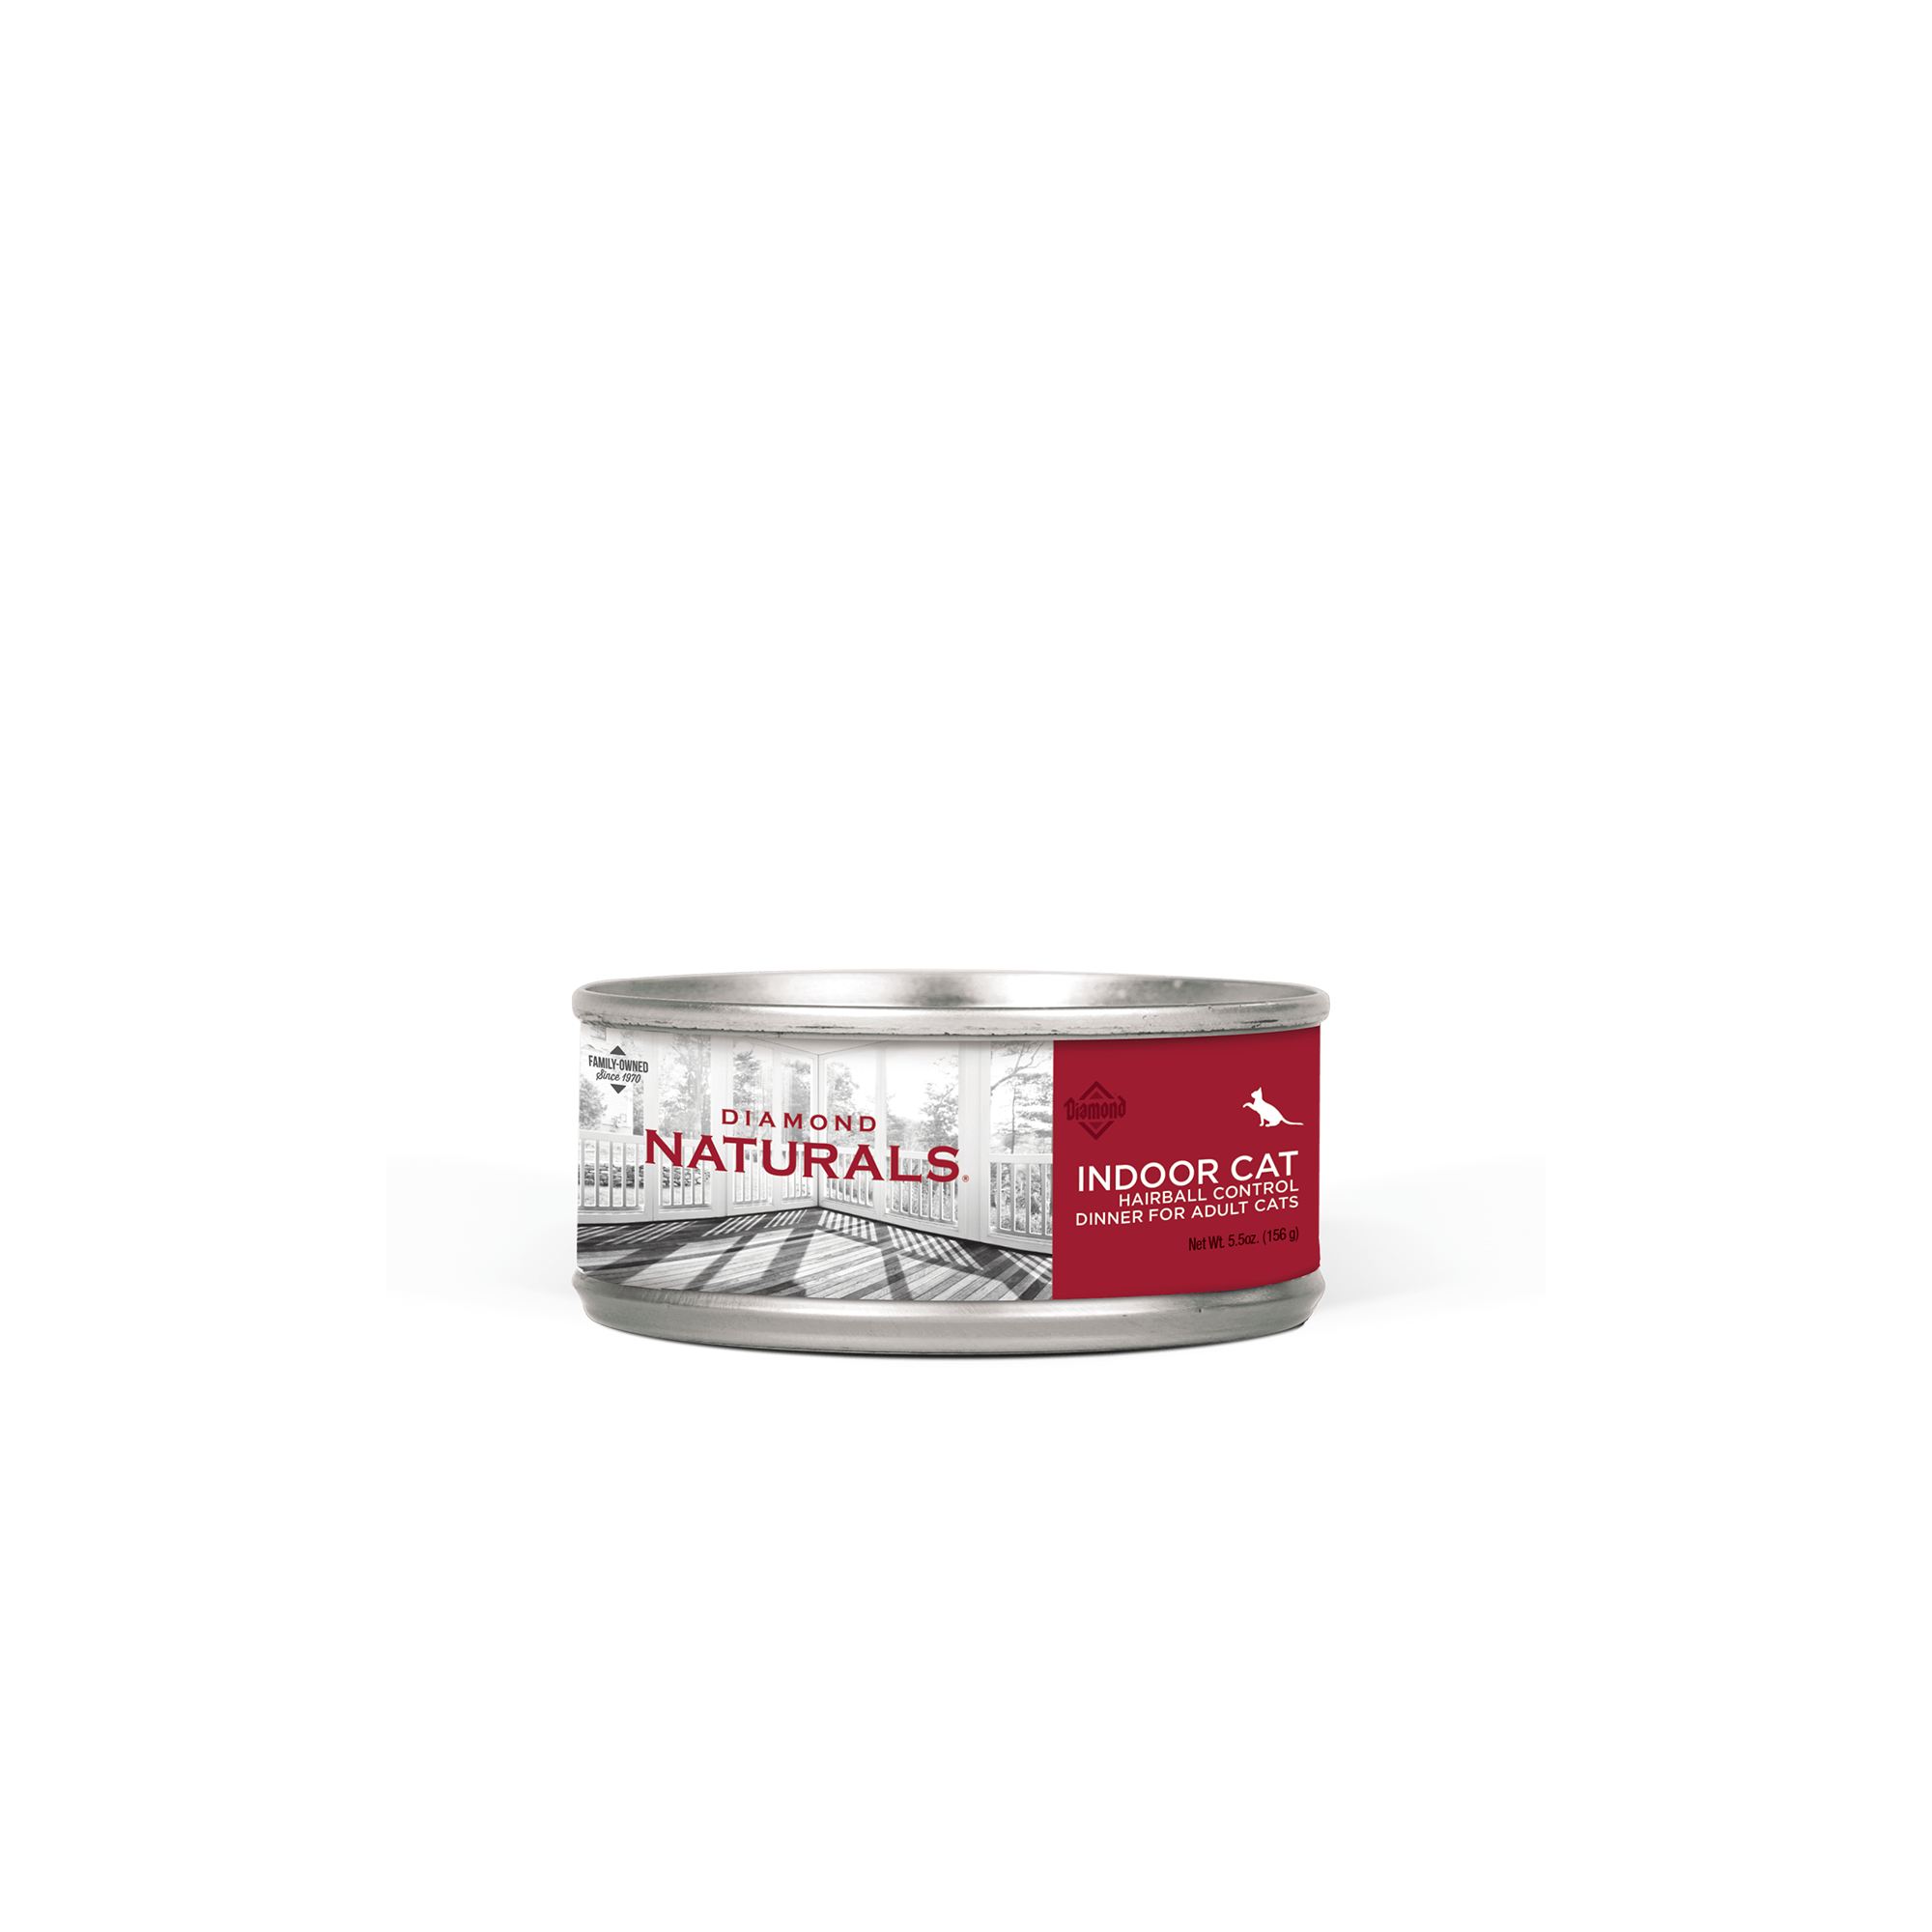 Diamond Naturals Hairball Control Canned Dinner for Adult Cats product packaging